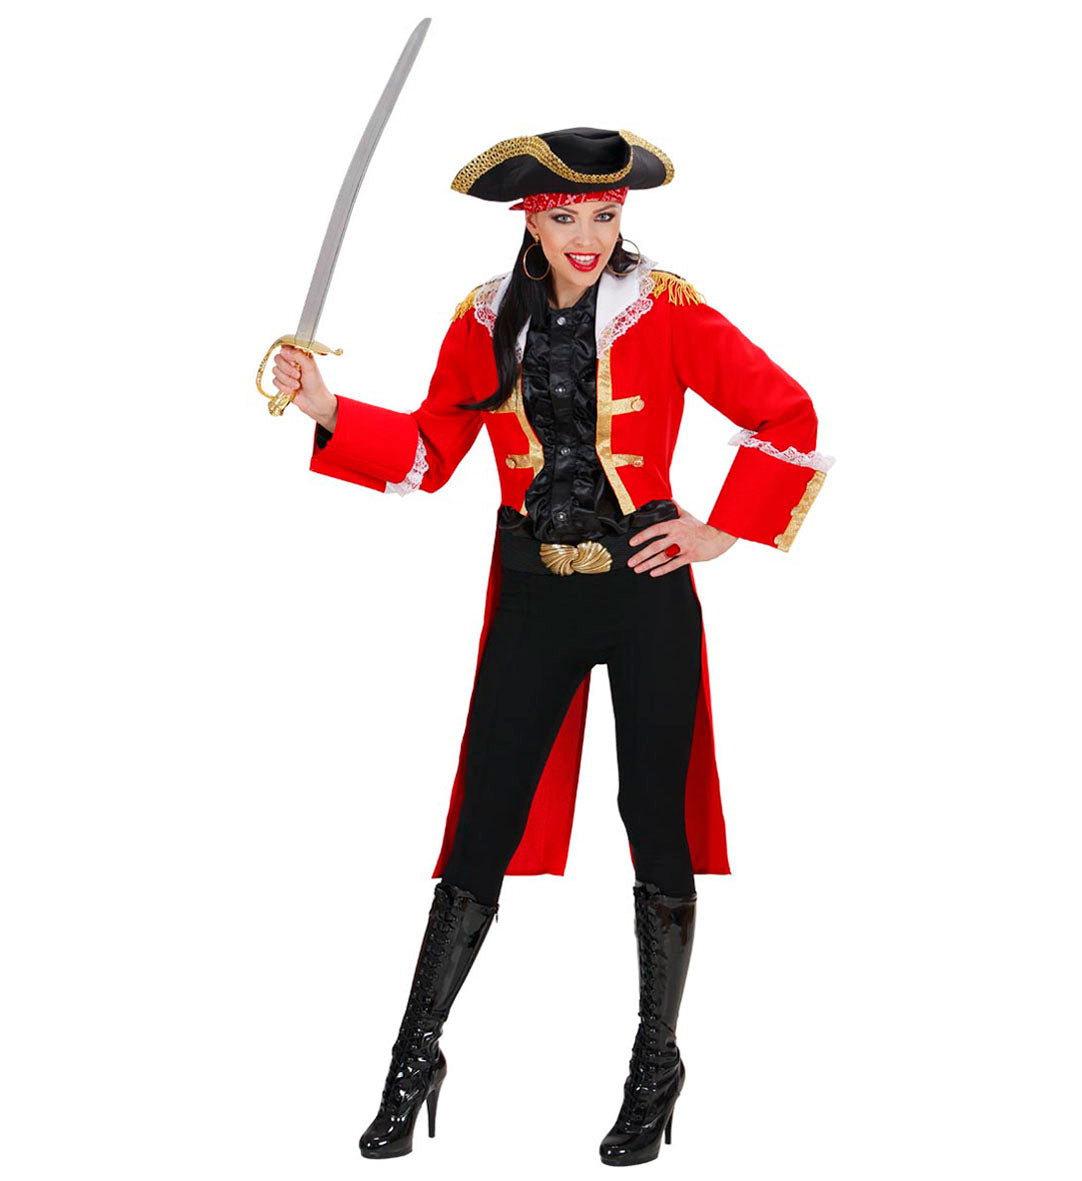 Pirate Captain Lady outfit for women